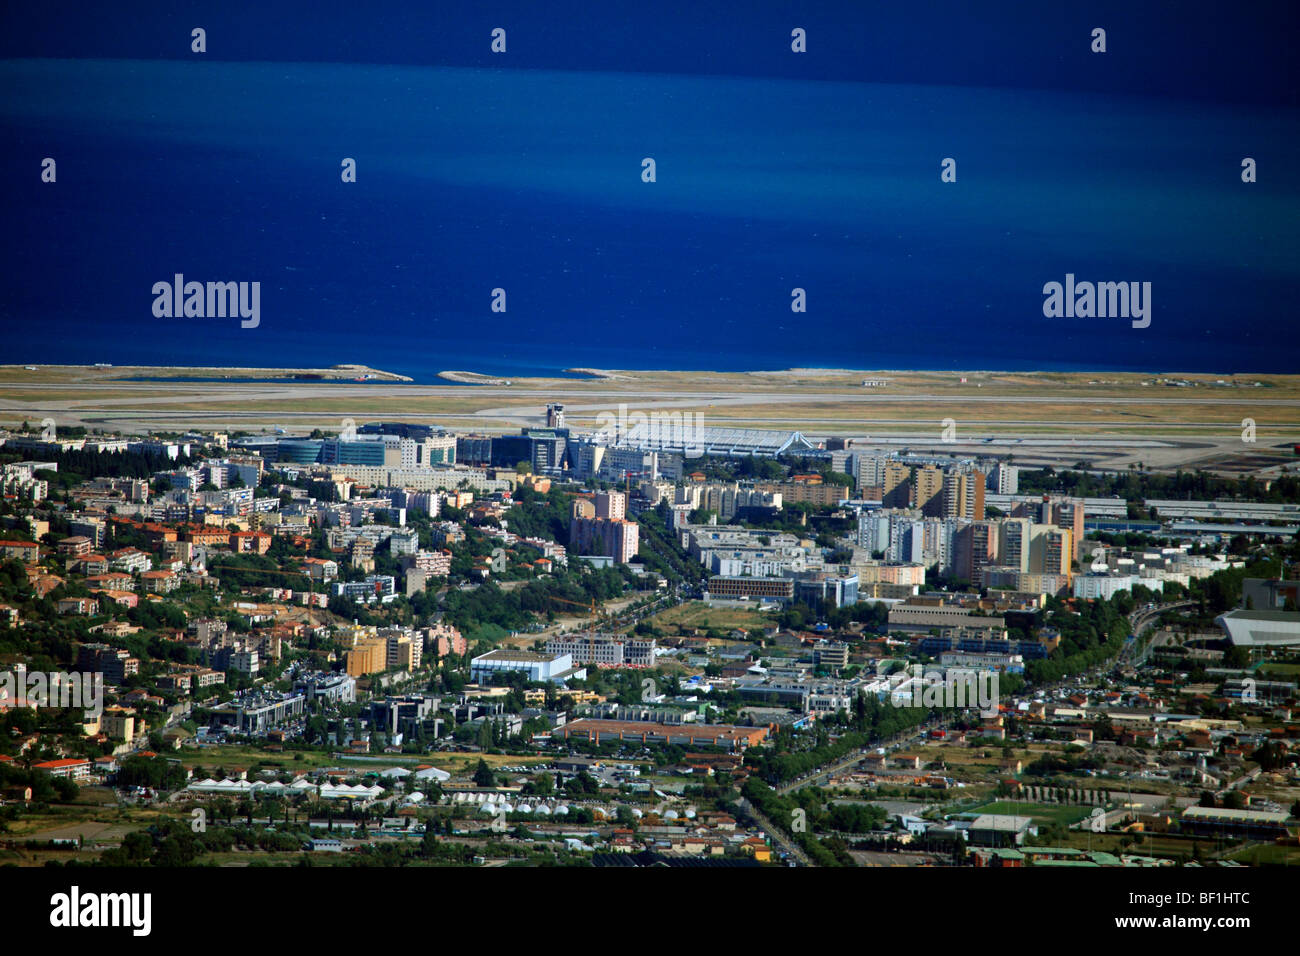 The Nice city airport close to the mediterranean sea Stock Photo